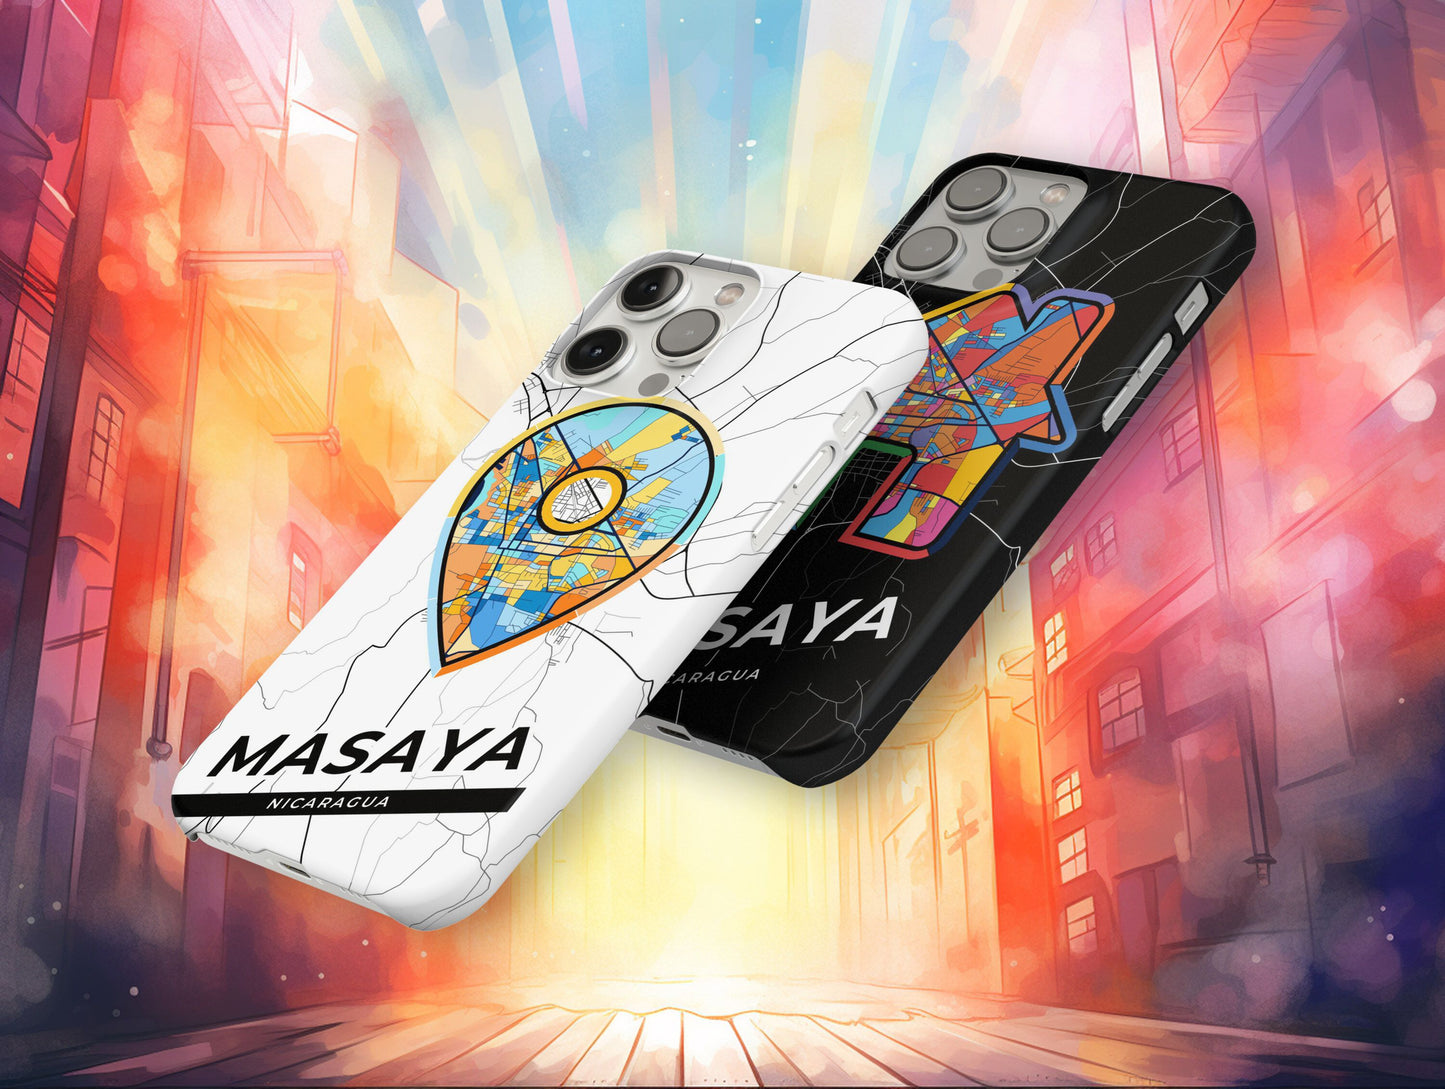 Masaya Nicaragua slim phone case with colorful icon. Birthday, wedding or housewarming gift. Couple match cases.